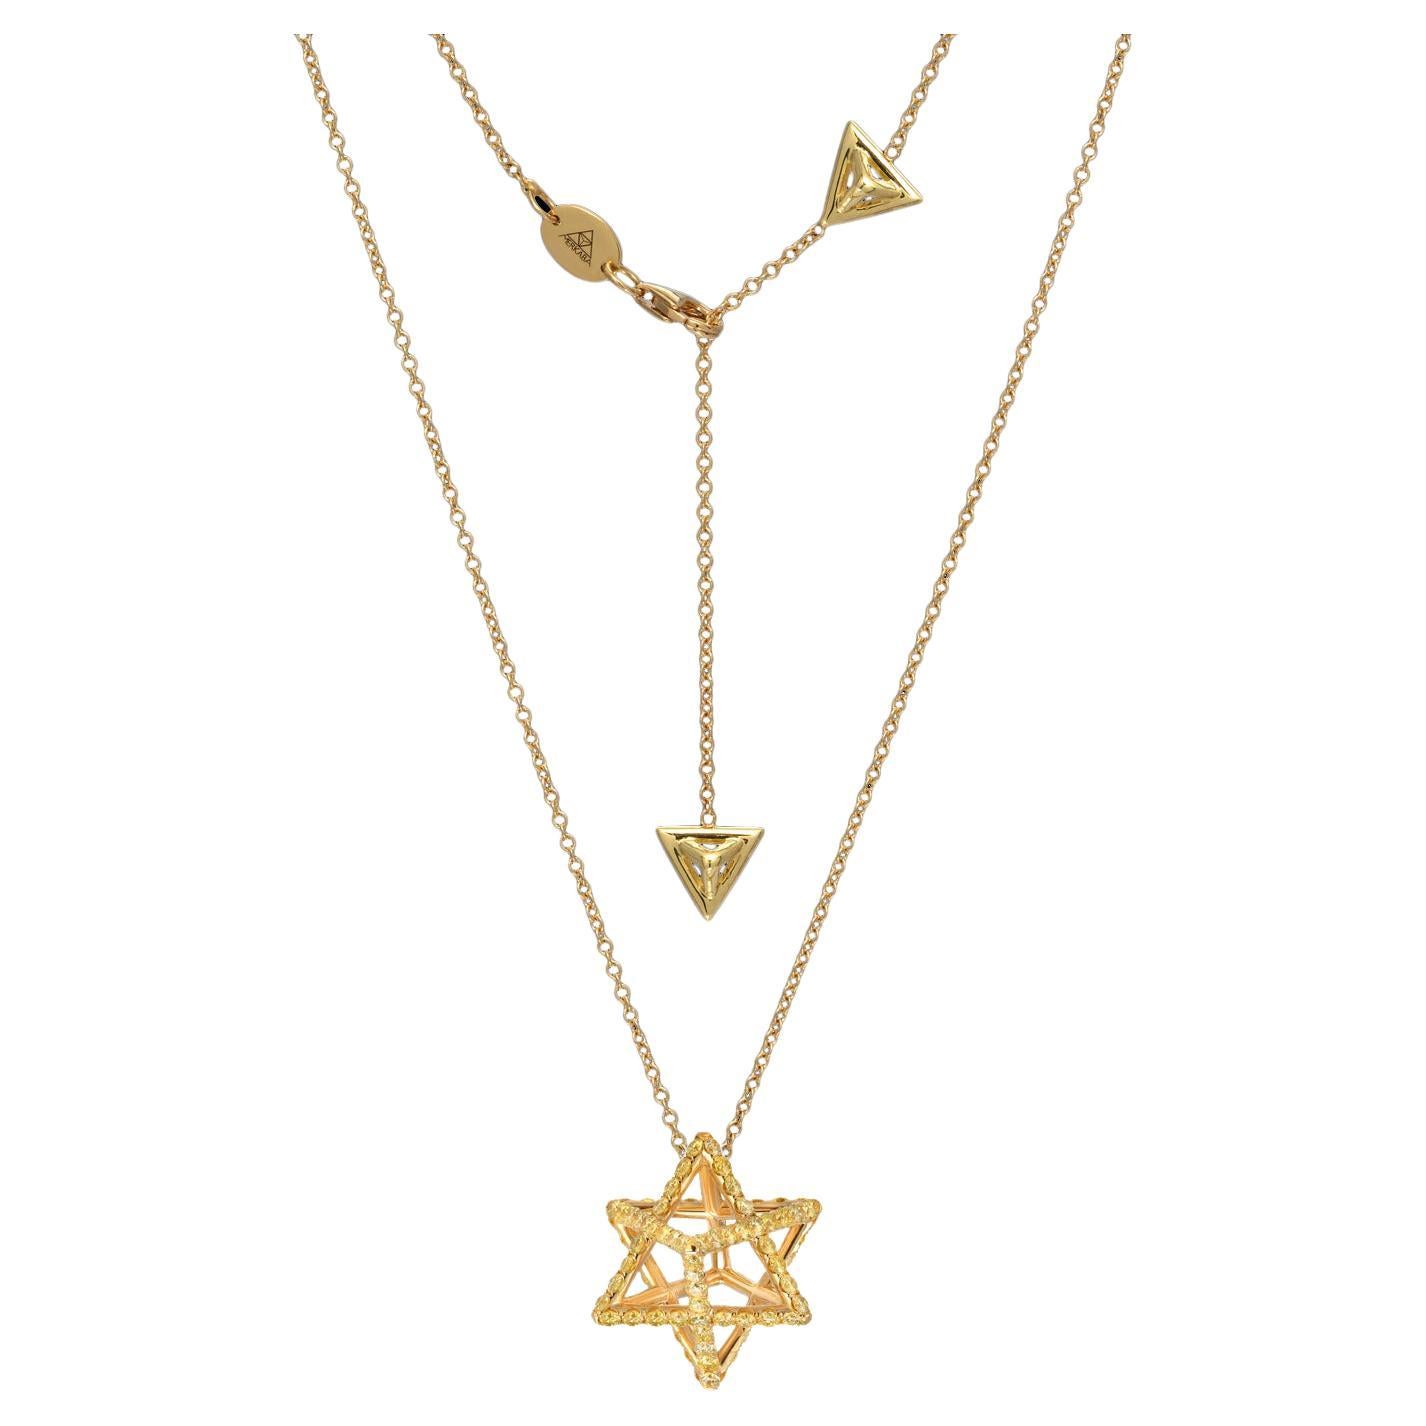 Merkaba Tetrahedron 18k yellow gold pendant necklace, featuring a total of approximately 1.28 carats of round brilliant fancy yellow diamonds. This geometric jewelry piece, suspends elegantly at the chest, measuring 0.68